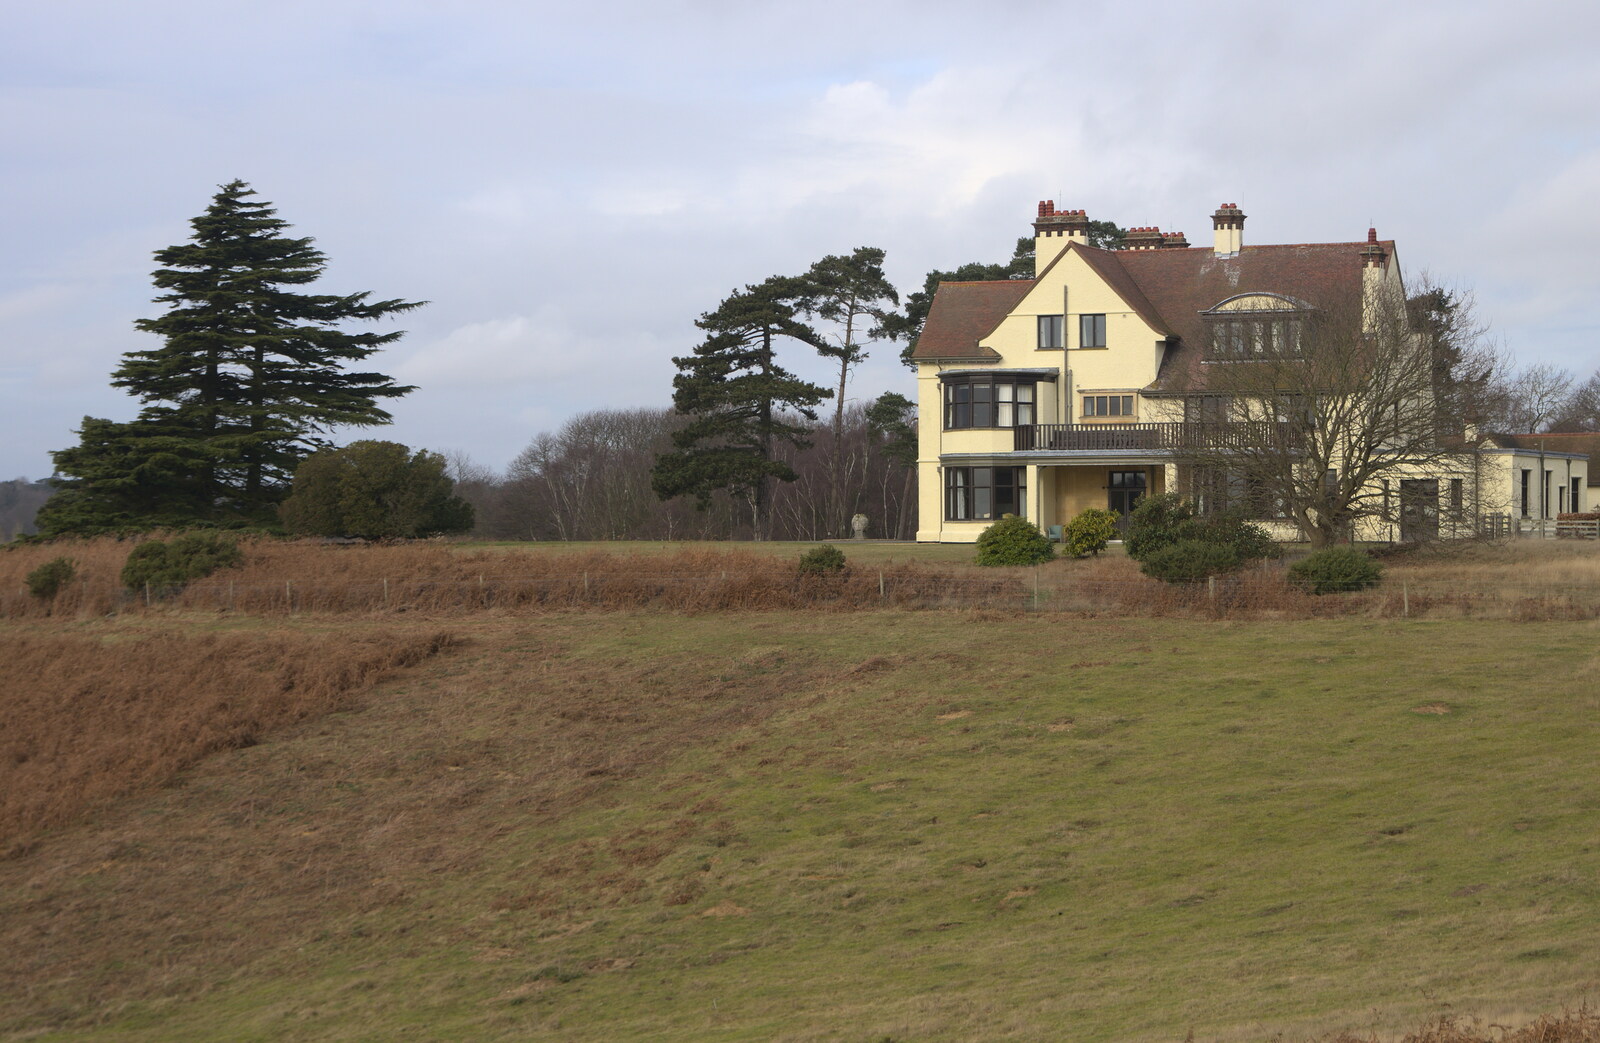 Tranmer House from A Trip to Sutton Hoo, Woodbridge, Suffolk - 29th January 2017